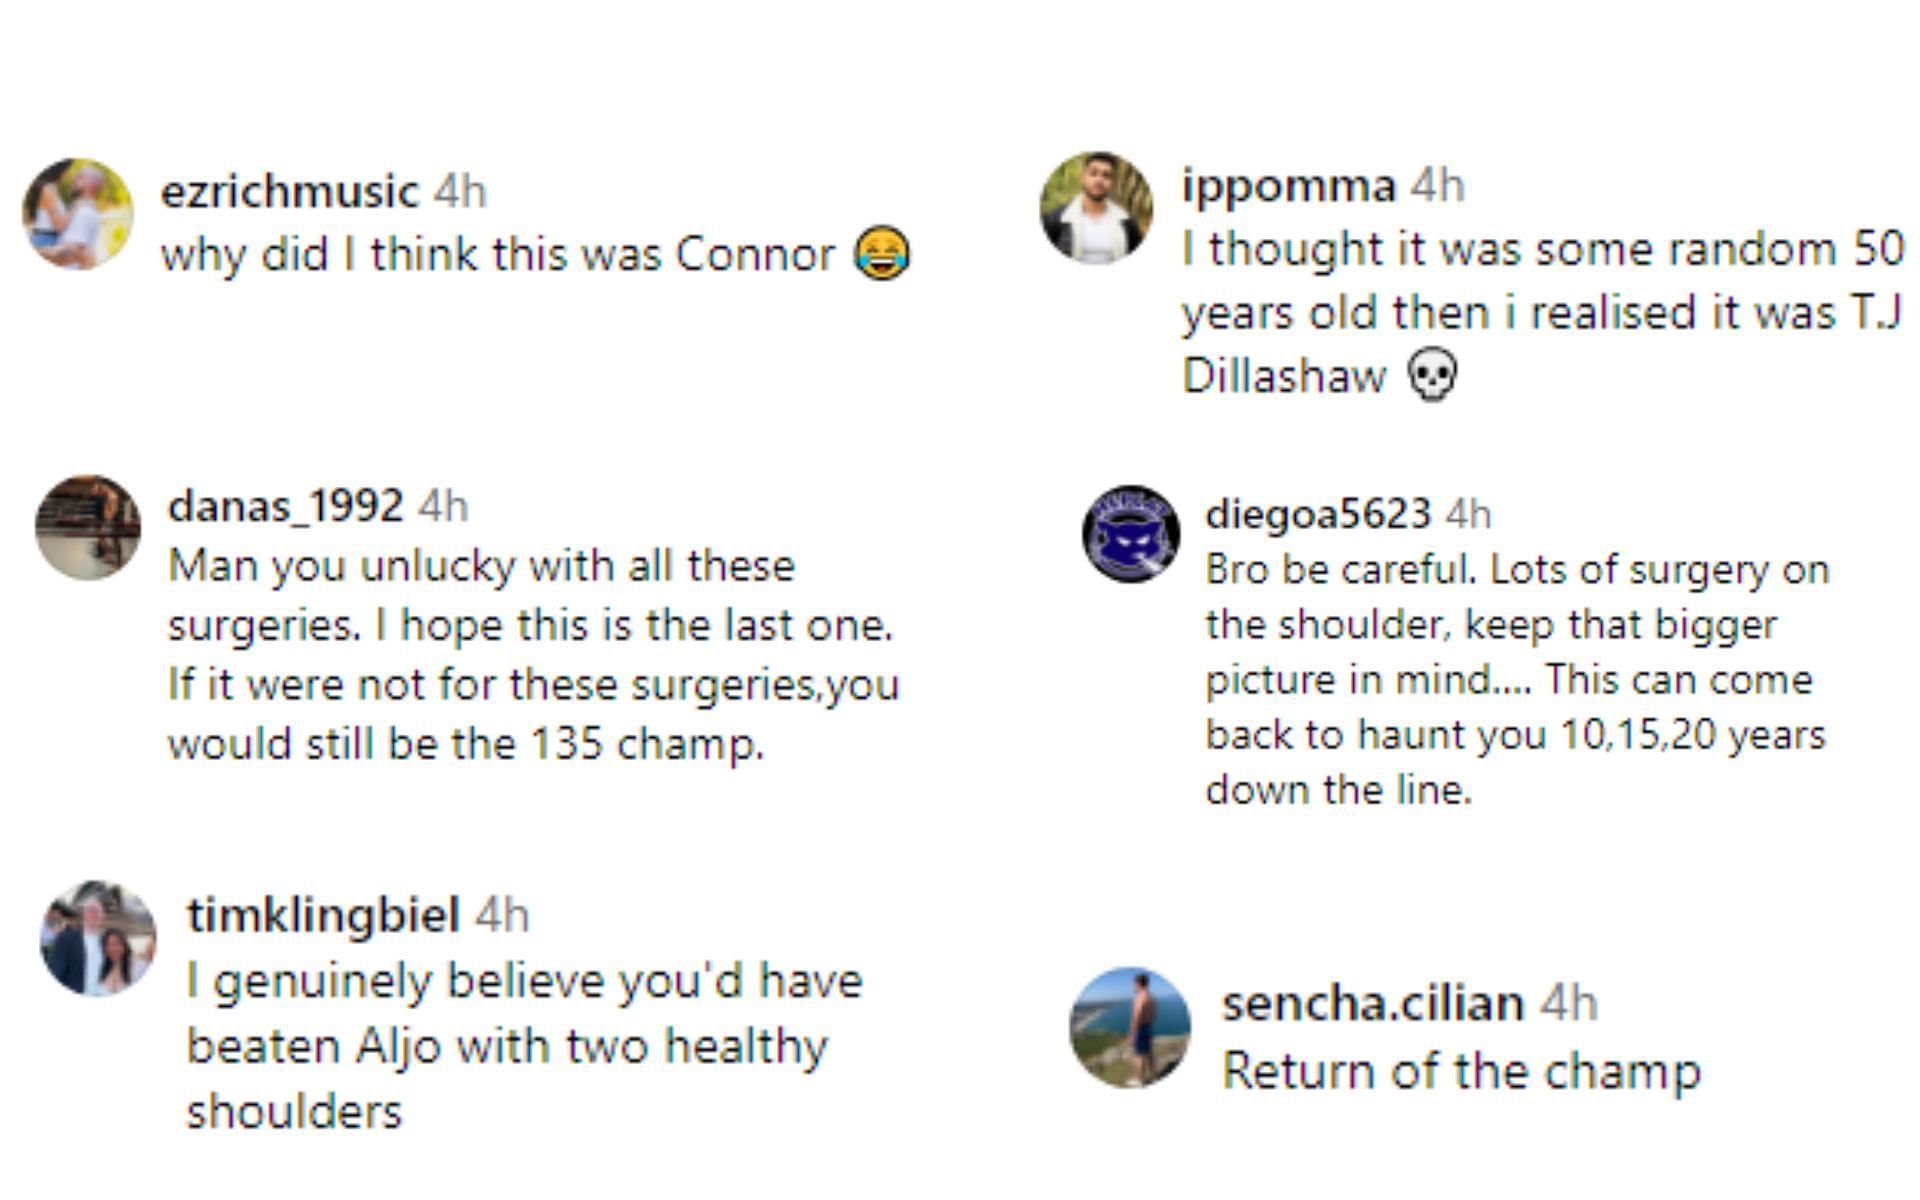 Fans reaction to Dillashaw hinting at a return [Image courtesy: @tjdillashaw - Instagram]